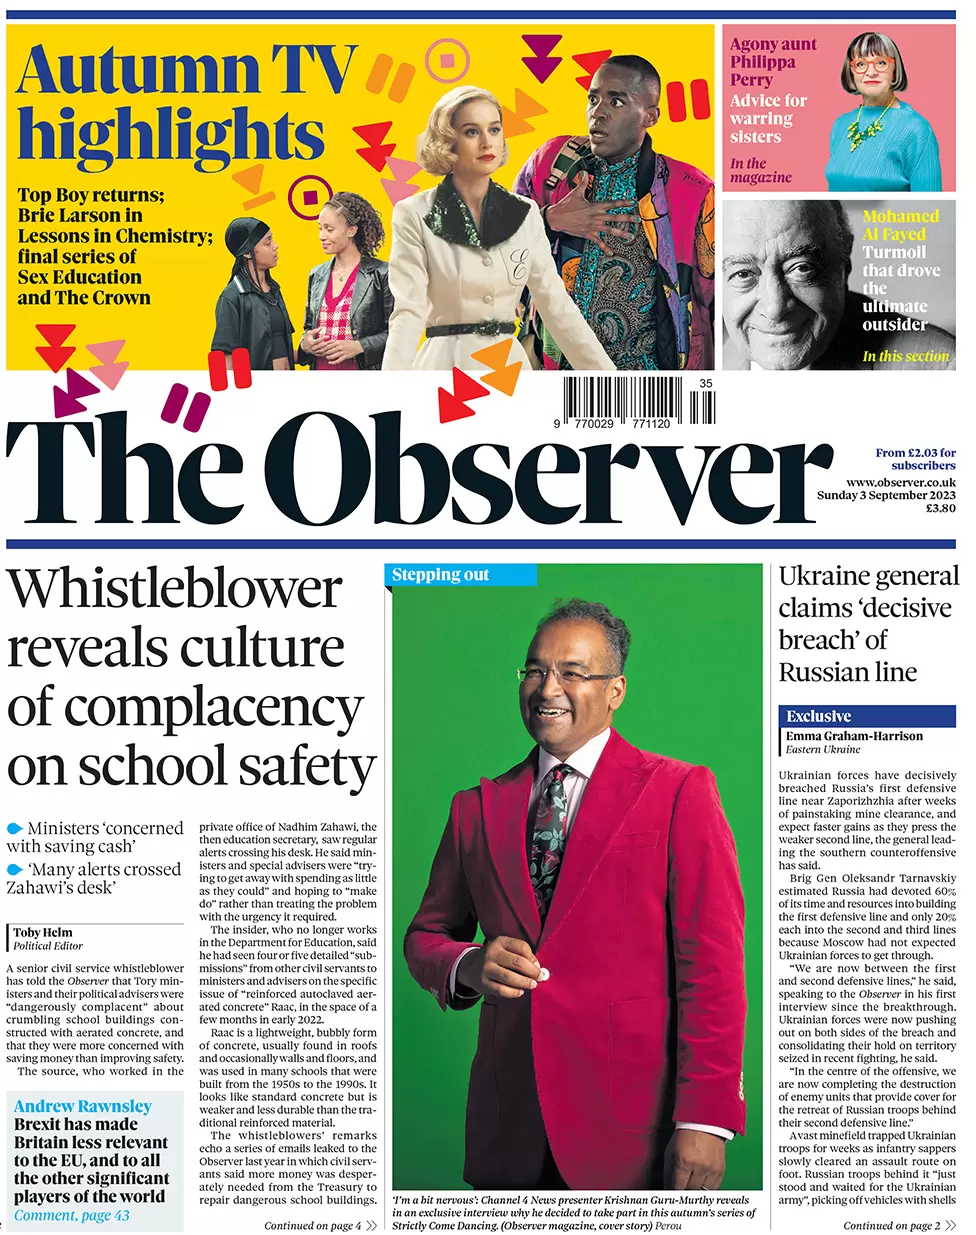 The Observer - Whistleblower reveals culture of complacency on school safety